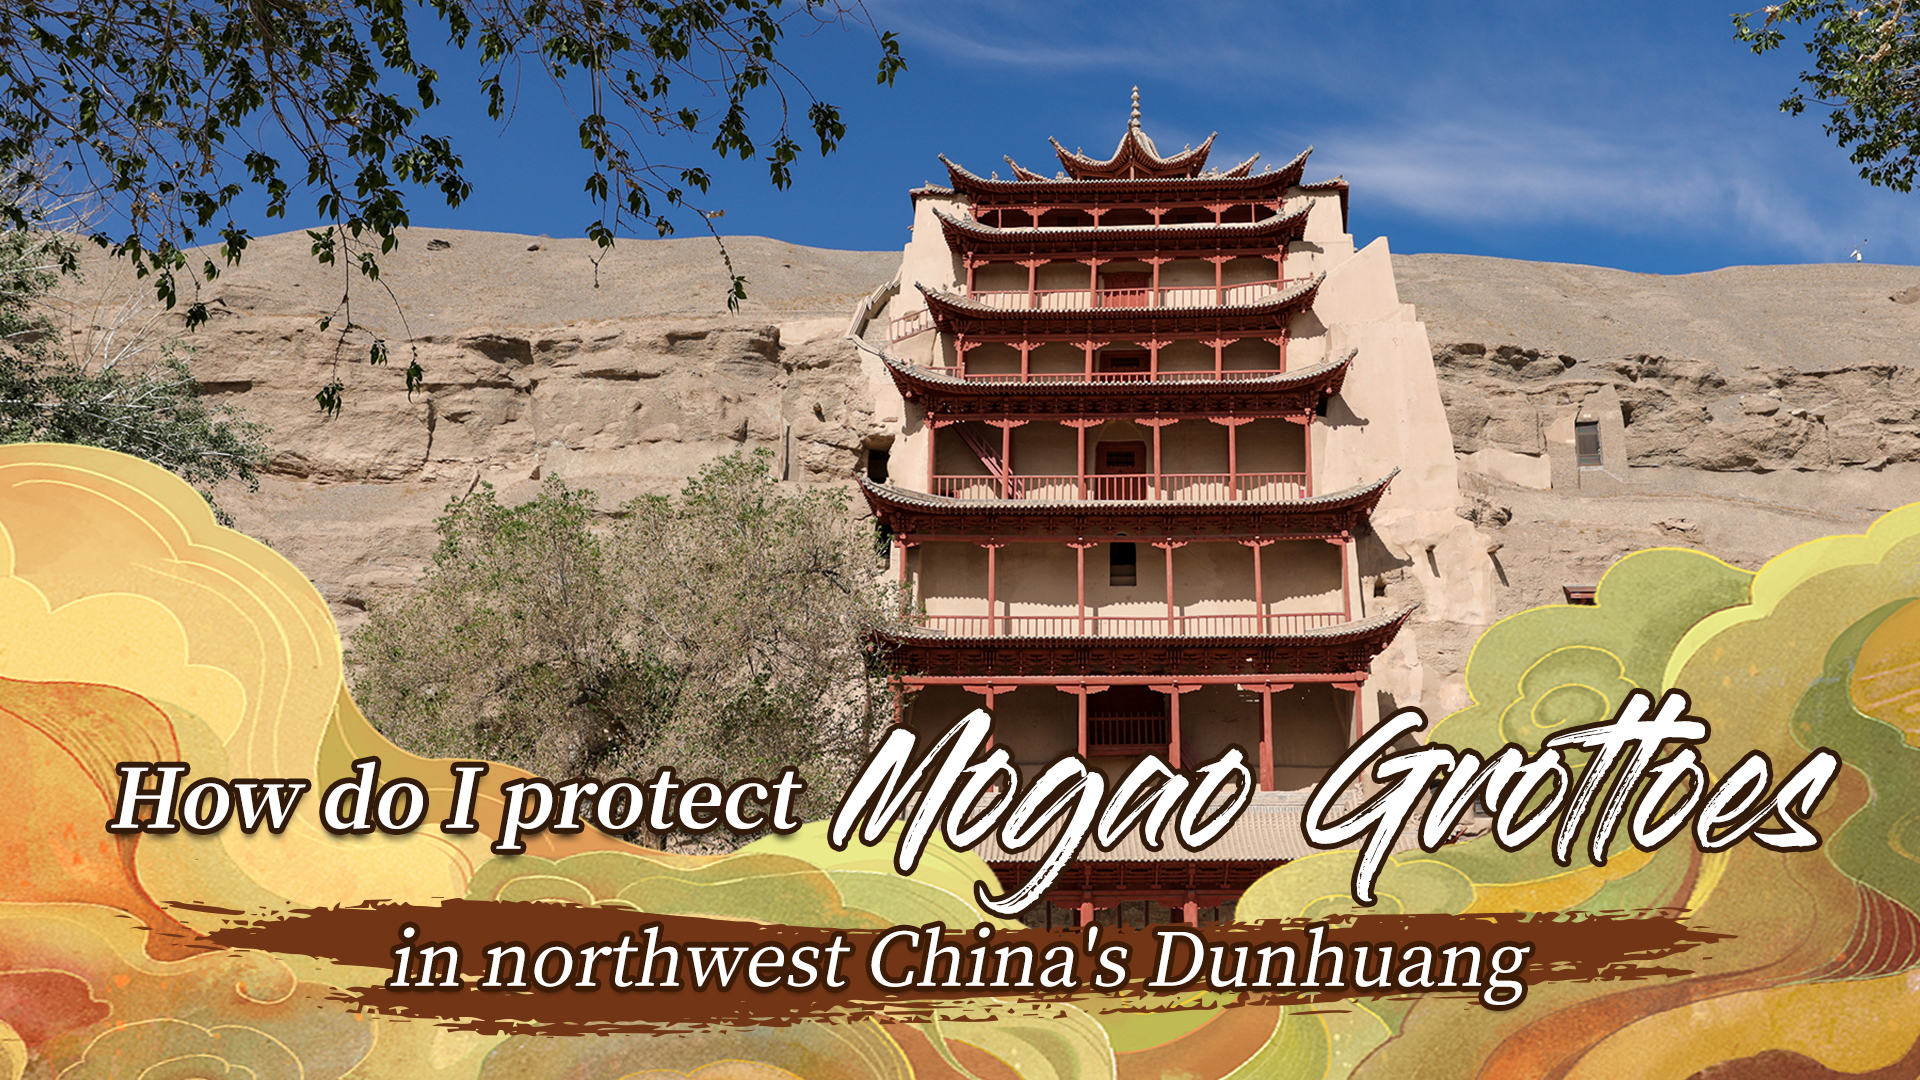 Watch: How are Mogao Grottoes in NW China's Dunhuang protected?